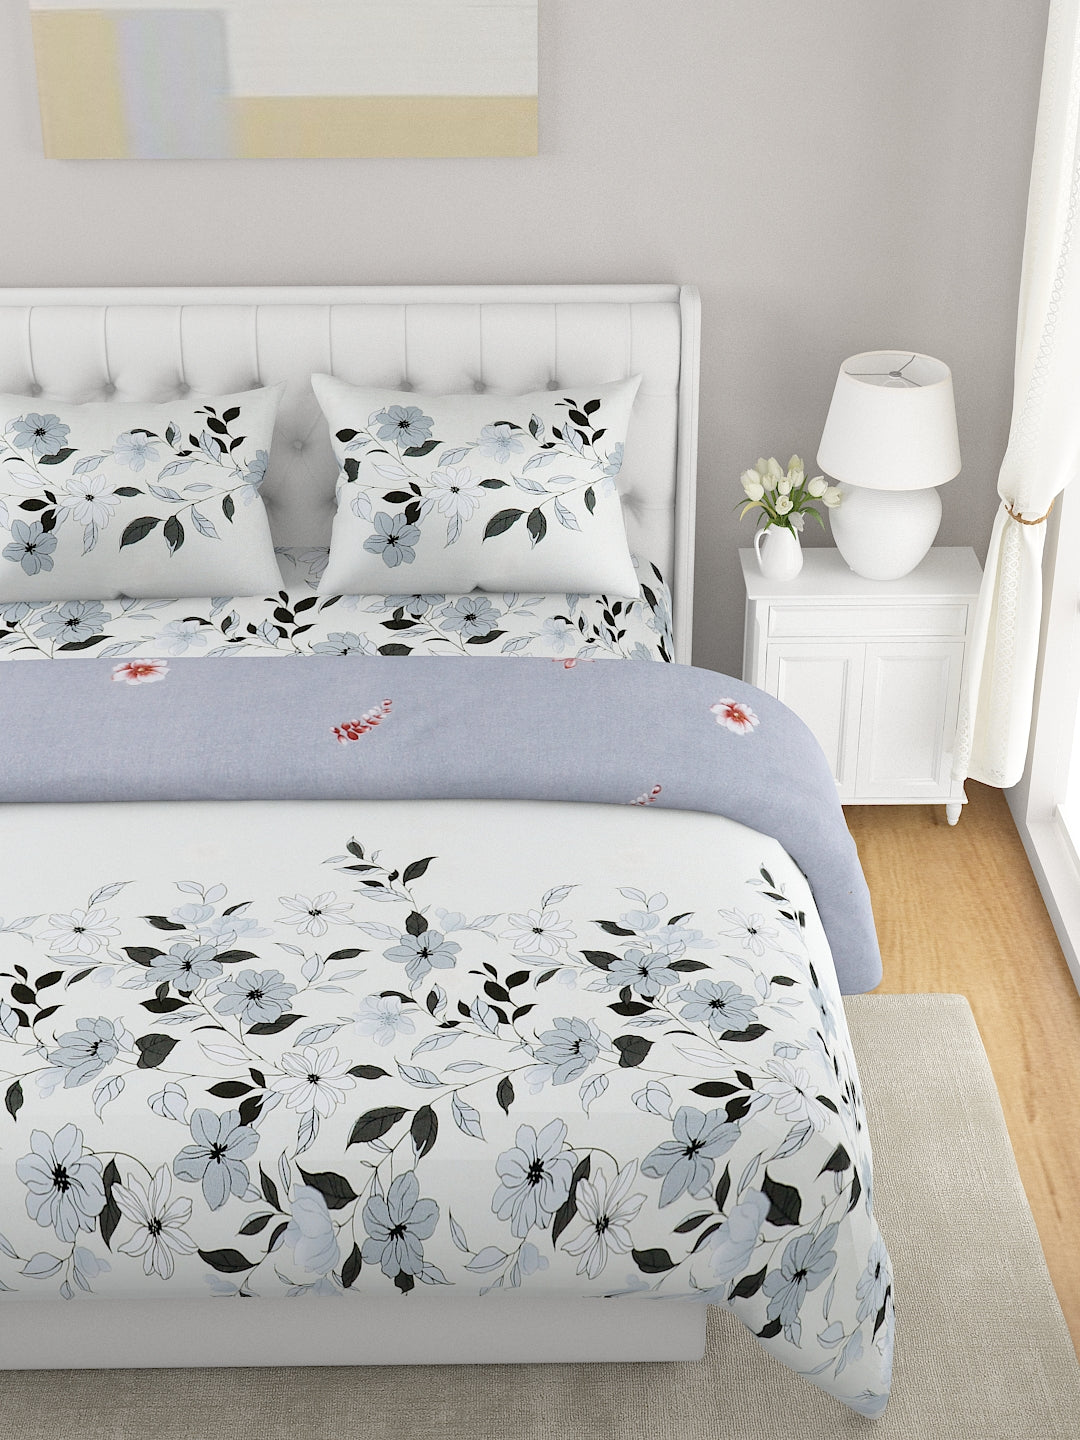 Grey & White Floral Printed Double Queen Bedding Set